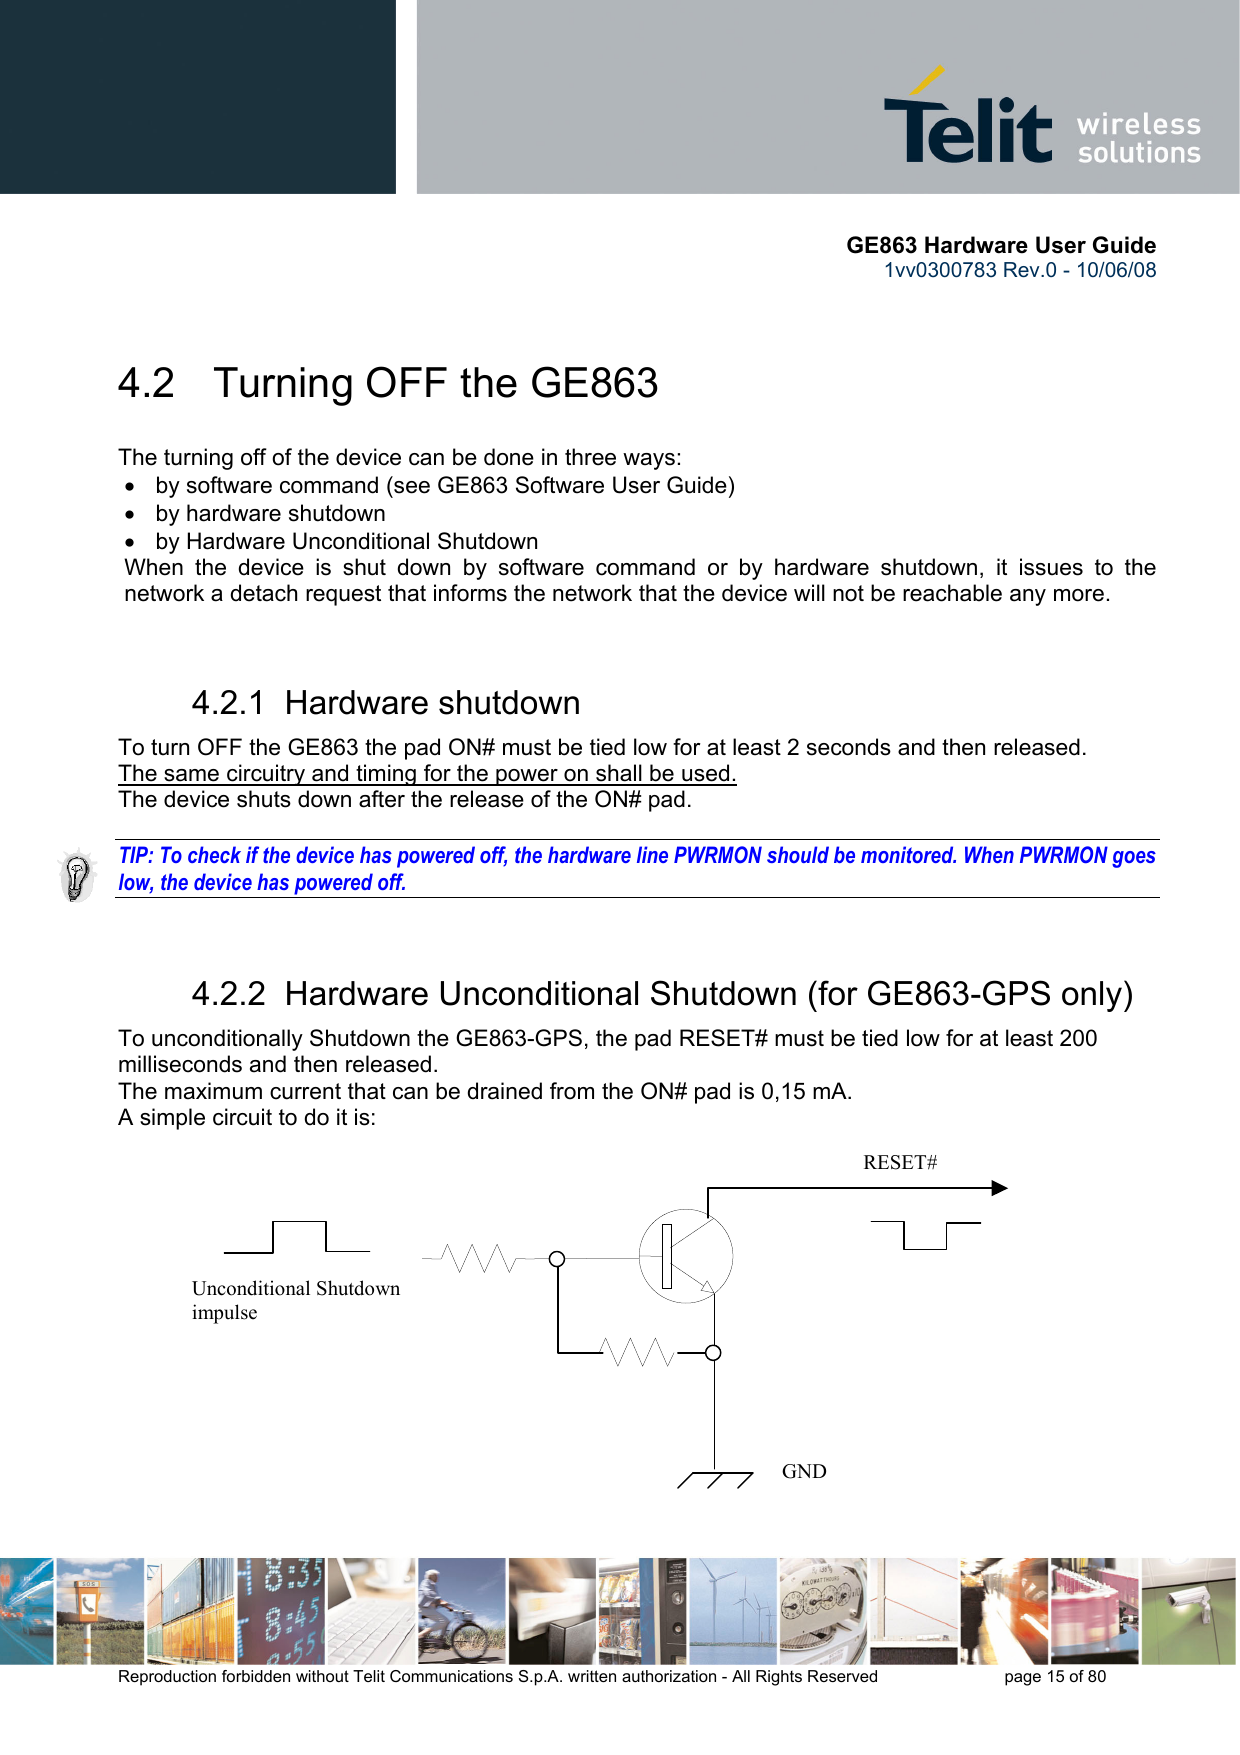       GE863 Hardware User Guide 1vv0300783 Rev.0 - 10/06/08 Reproduction forbidden without Telit Communications S.p.A. written authorization - All Rights Reserved    page 15 of 80   4.2   Turning OFF the GE863 The turning off of the device can be done in three ways: •  by software command (see GE863 Software User Guide) •  by hardware shutdown •  by Hardware Unconditional Shutdown When the device is shut down by software command or by hardware shutdown, it issues to the network a detach request that informs the network that the device will not be reachable any more.   4.2.1  Hardware shutdown To turn OFF the GE863 the pad ON# must be tied low for at least 2 seconds and then released. The same circuitry and timing for the power on shall be used. The device shuts down after the release of the ON# pad.  TIP: To check if the device has powered off, the hardware line PWRMON should be monitored. When PWRMON goes low, the device has powered off.  4.2.2  Hardware Unconditional Shutdown (for GE863-GPS only) To unconditionally Shutdown the GE863-GPS, the pad RESET# must be tied low for at least 200 milliseconds and then released. The maximum current that can be drained from the ON# pad is 0,15 mA. A simple circuit to do it is:              RESET# Unconditional Shutdown impulse   GND